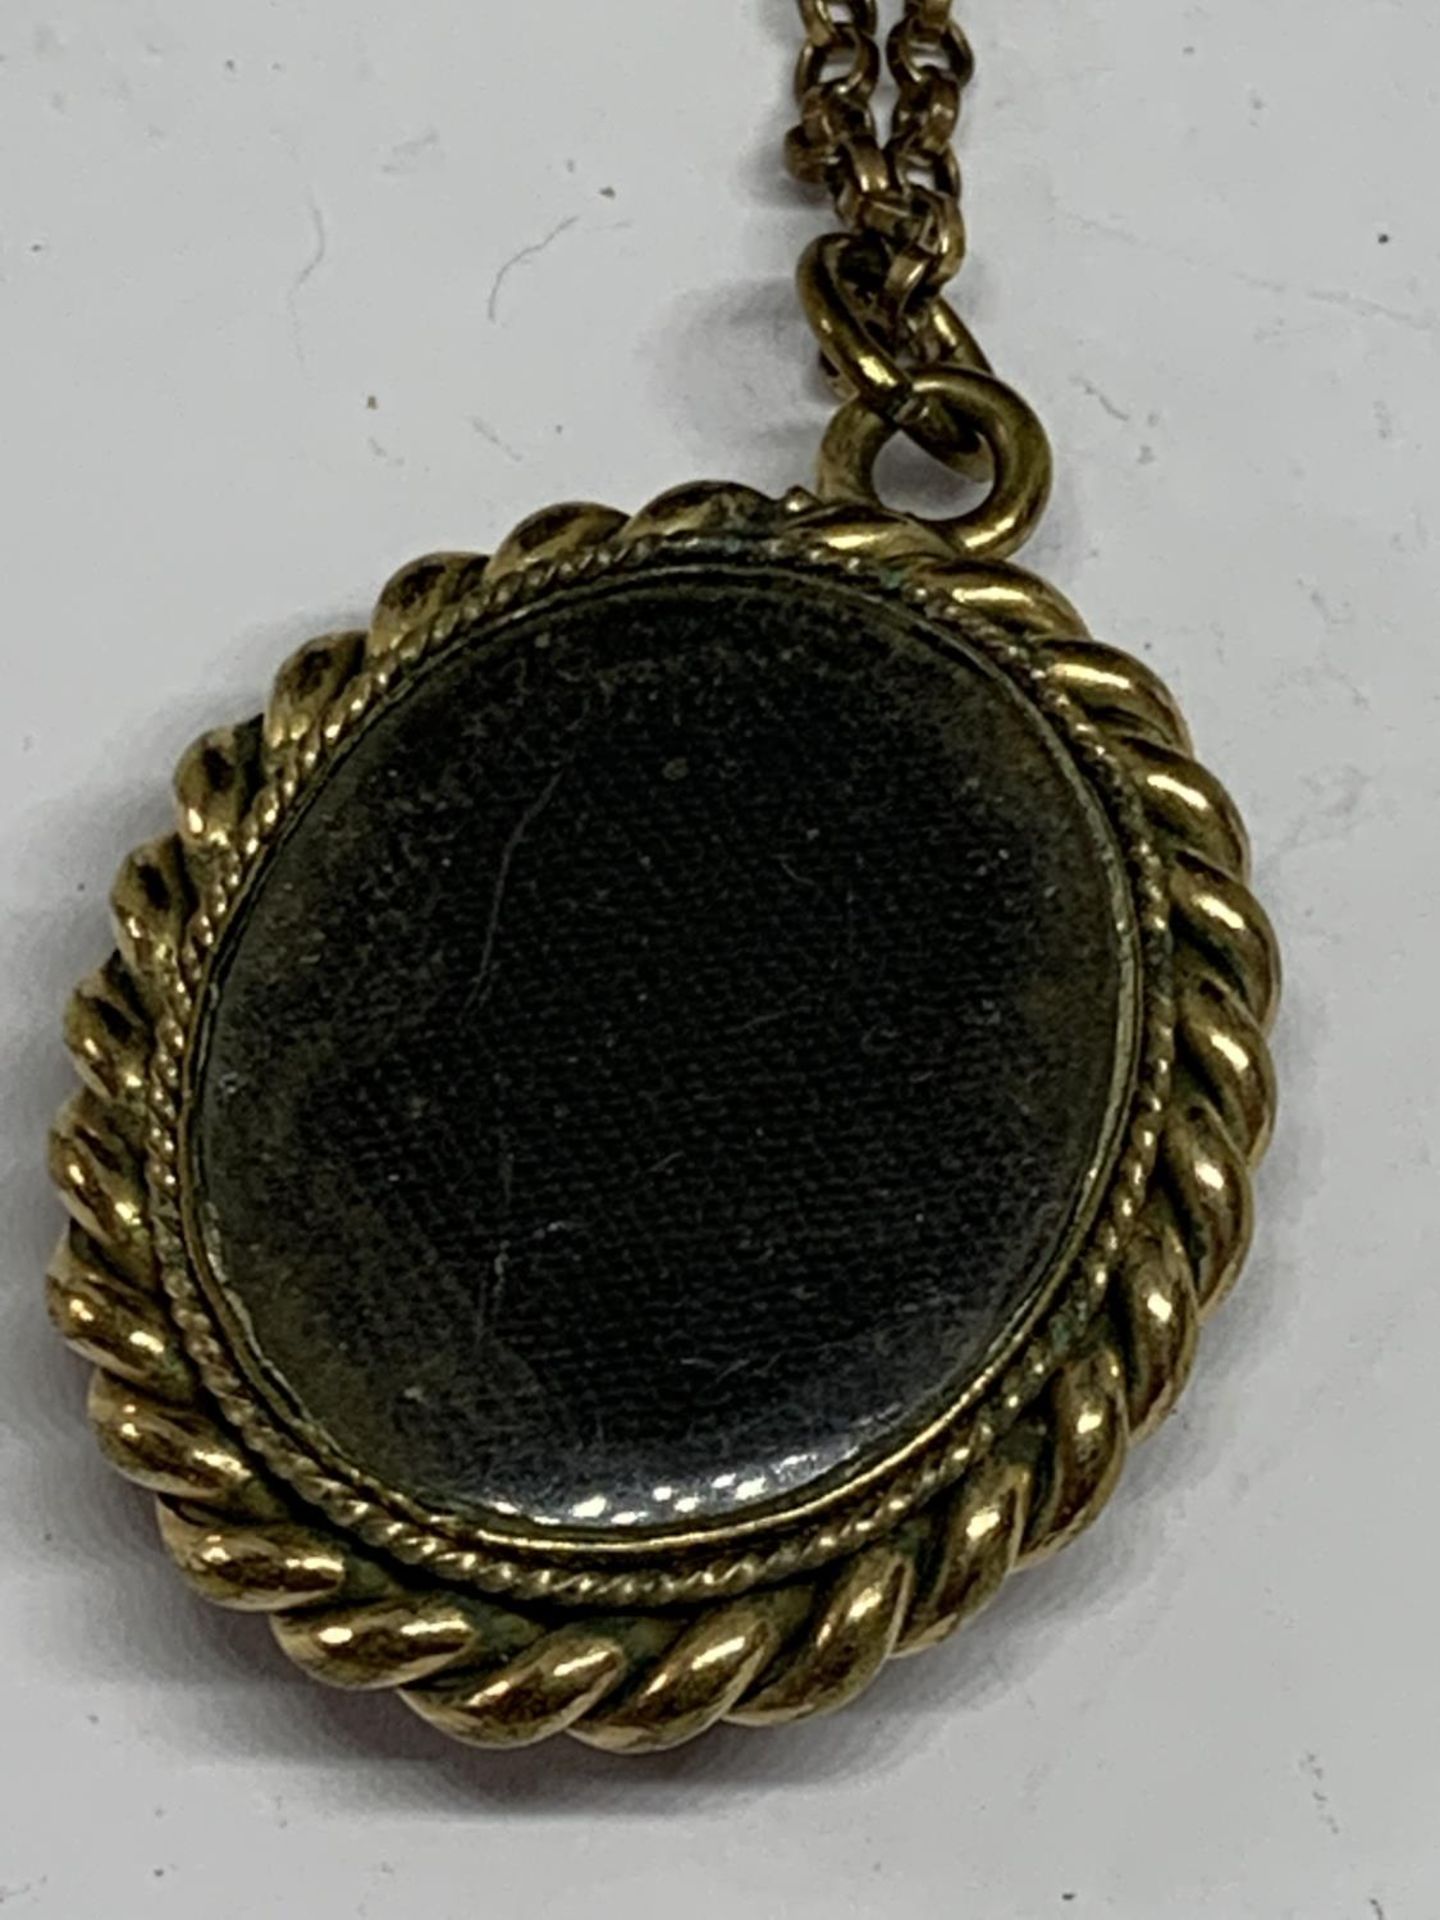 A VICTORIAN LOCKET WITH A CERAMIC FRONT WITH A PICTURE OF A YOUNG BOY - Image 3 of 4